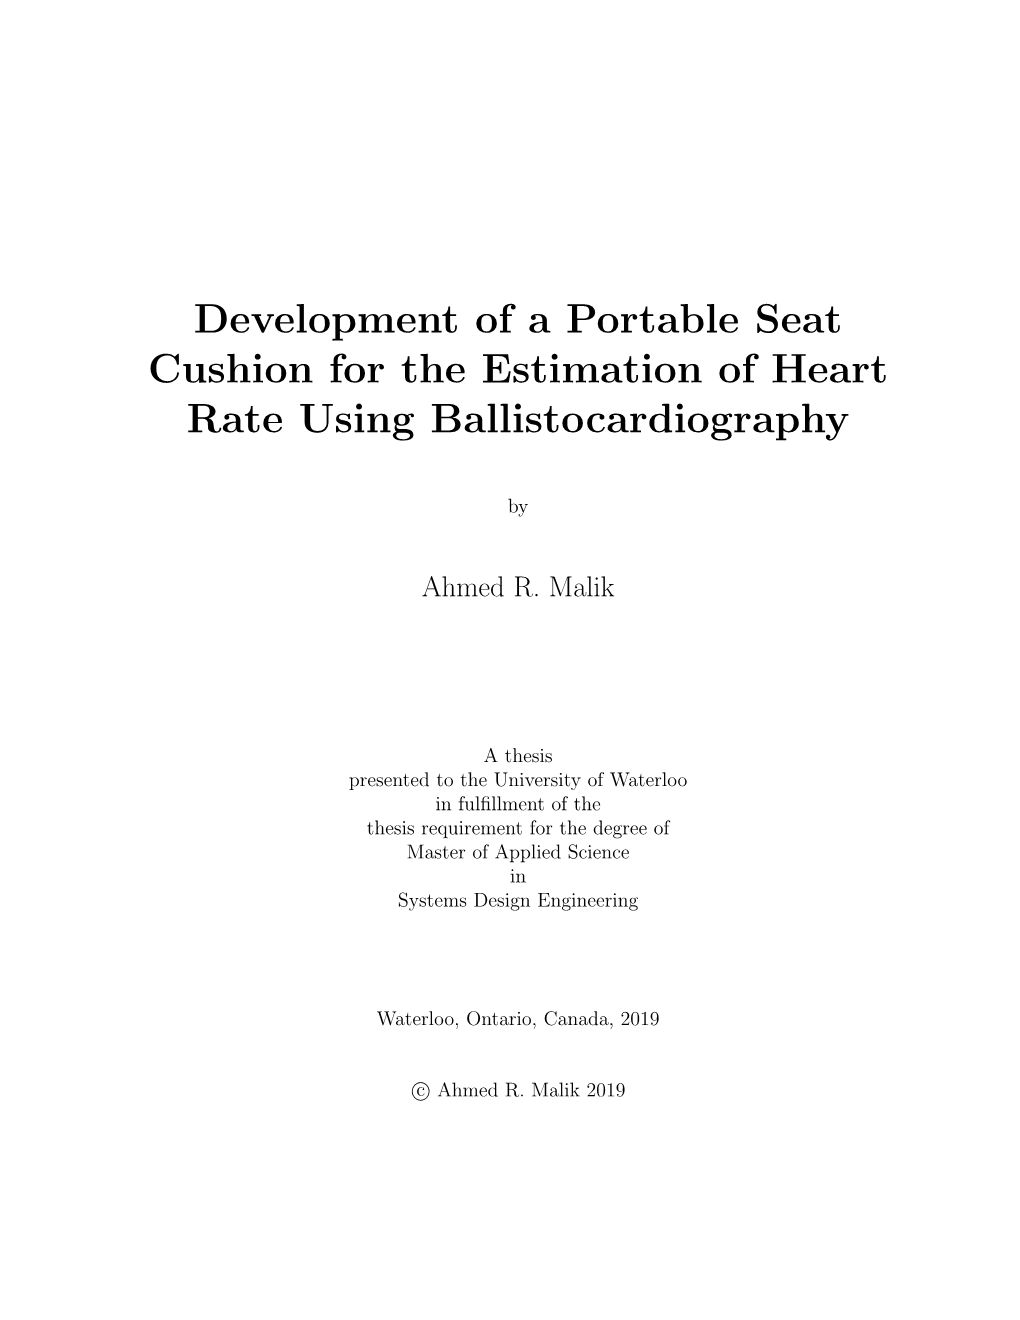 Development of a Portable Seat Cushion for the Estimation of Heart Rate Using Ballistocardiography